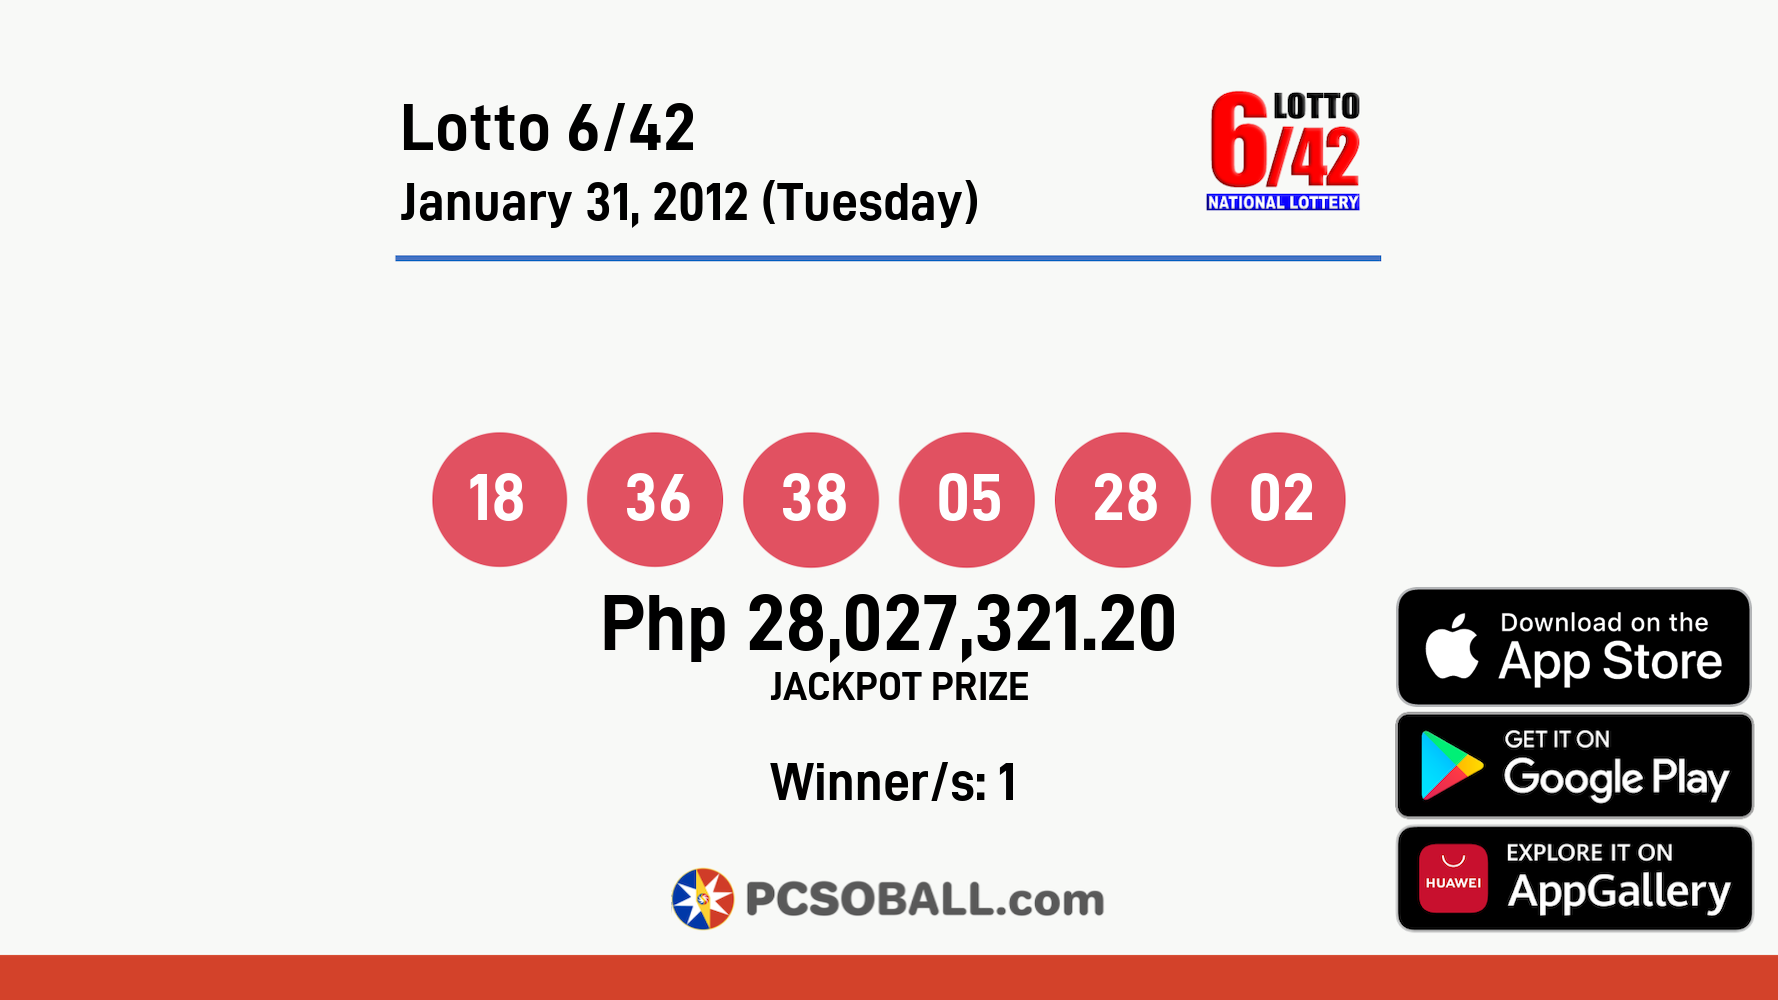 Lotto 6/42 January 31, 2012 (Tuesday) Result